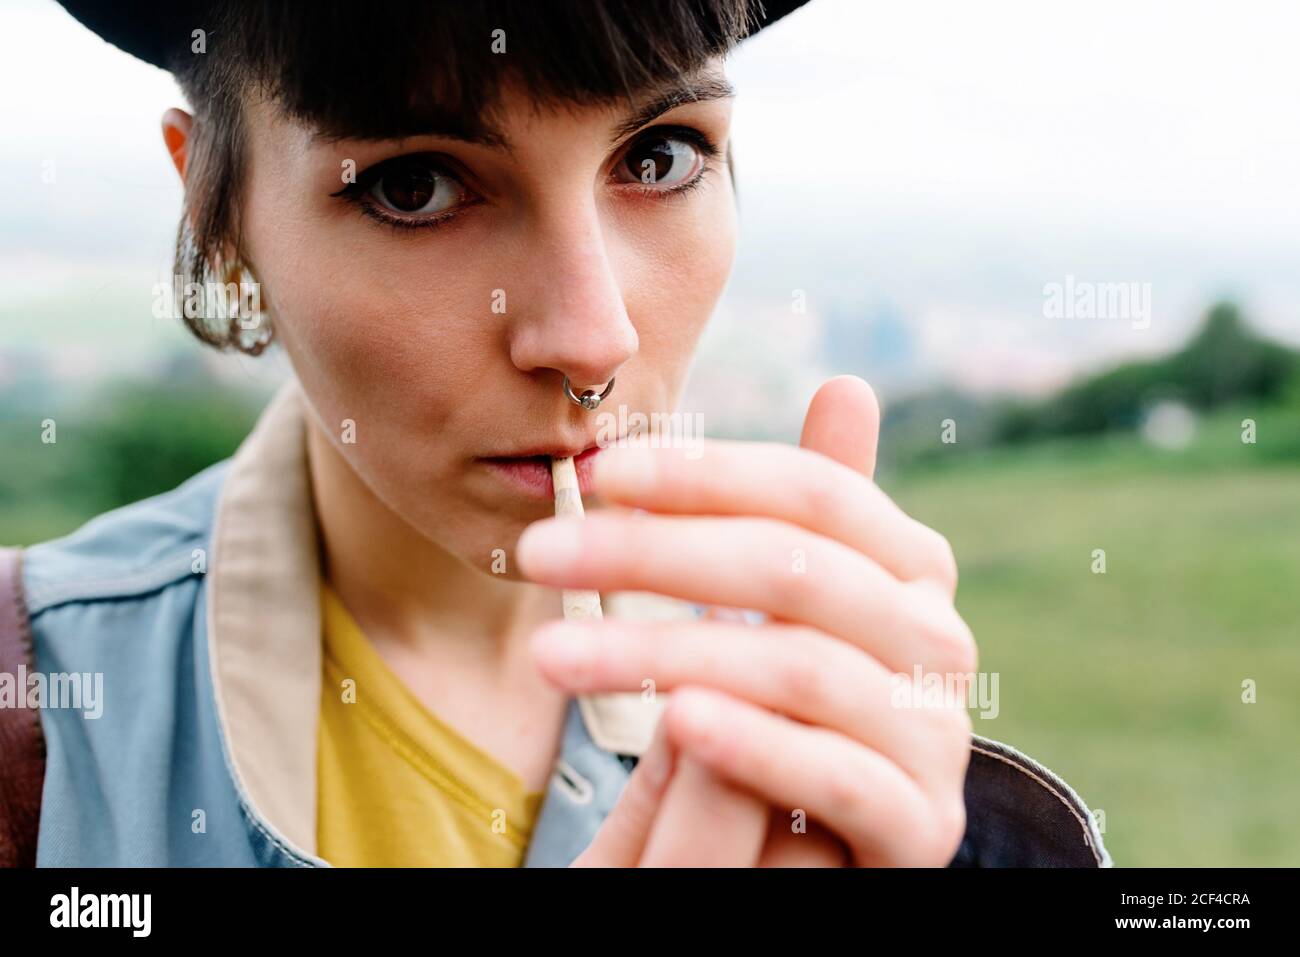 Crop informal lady in casual clothes with piercing in nose lighting cigarette while standing on street and looking at camera Stock Photo